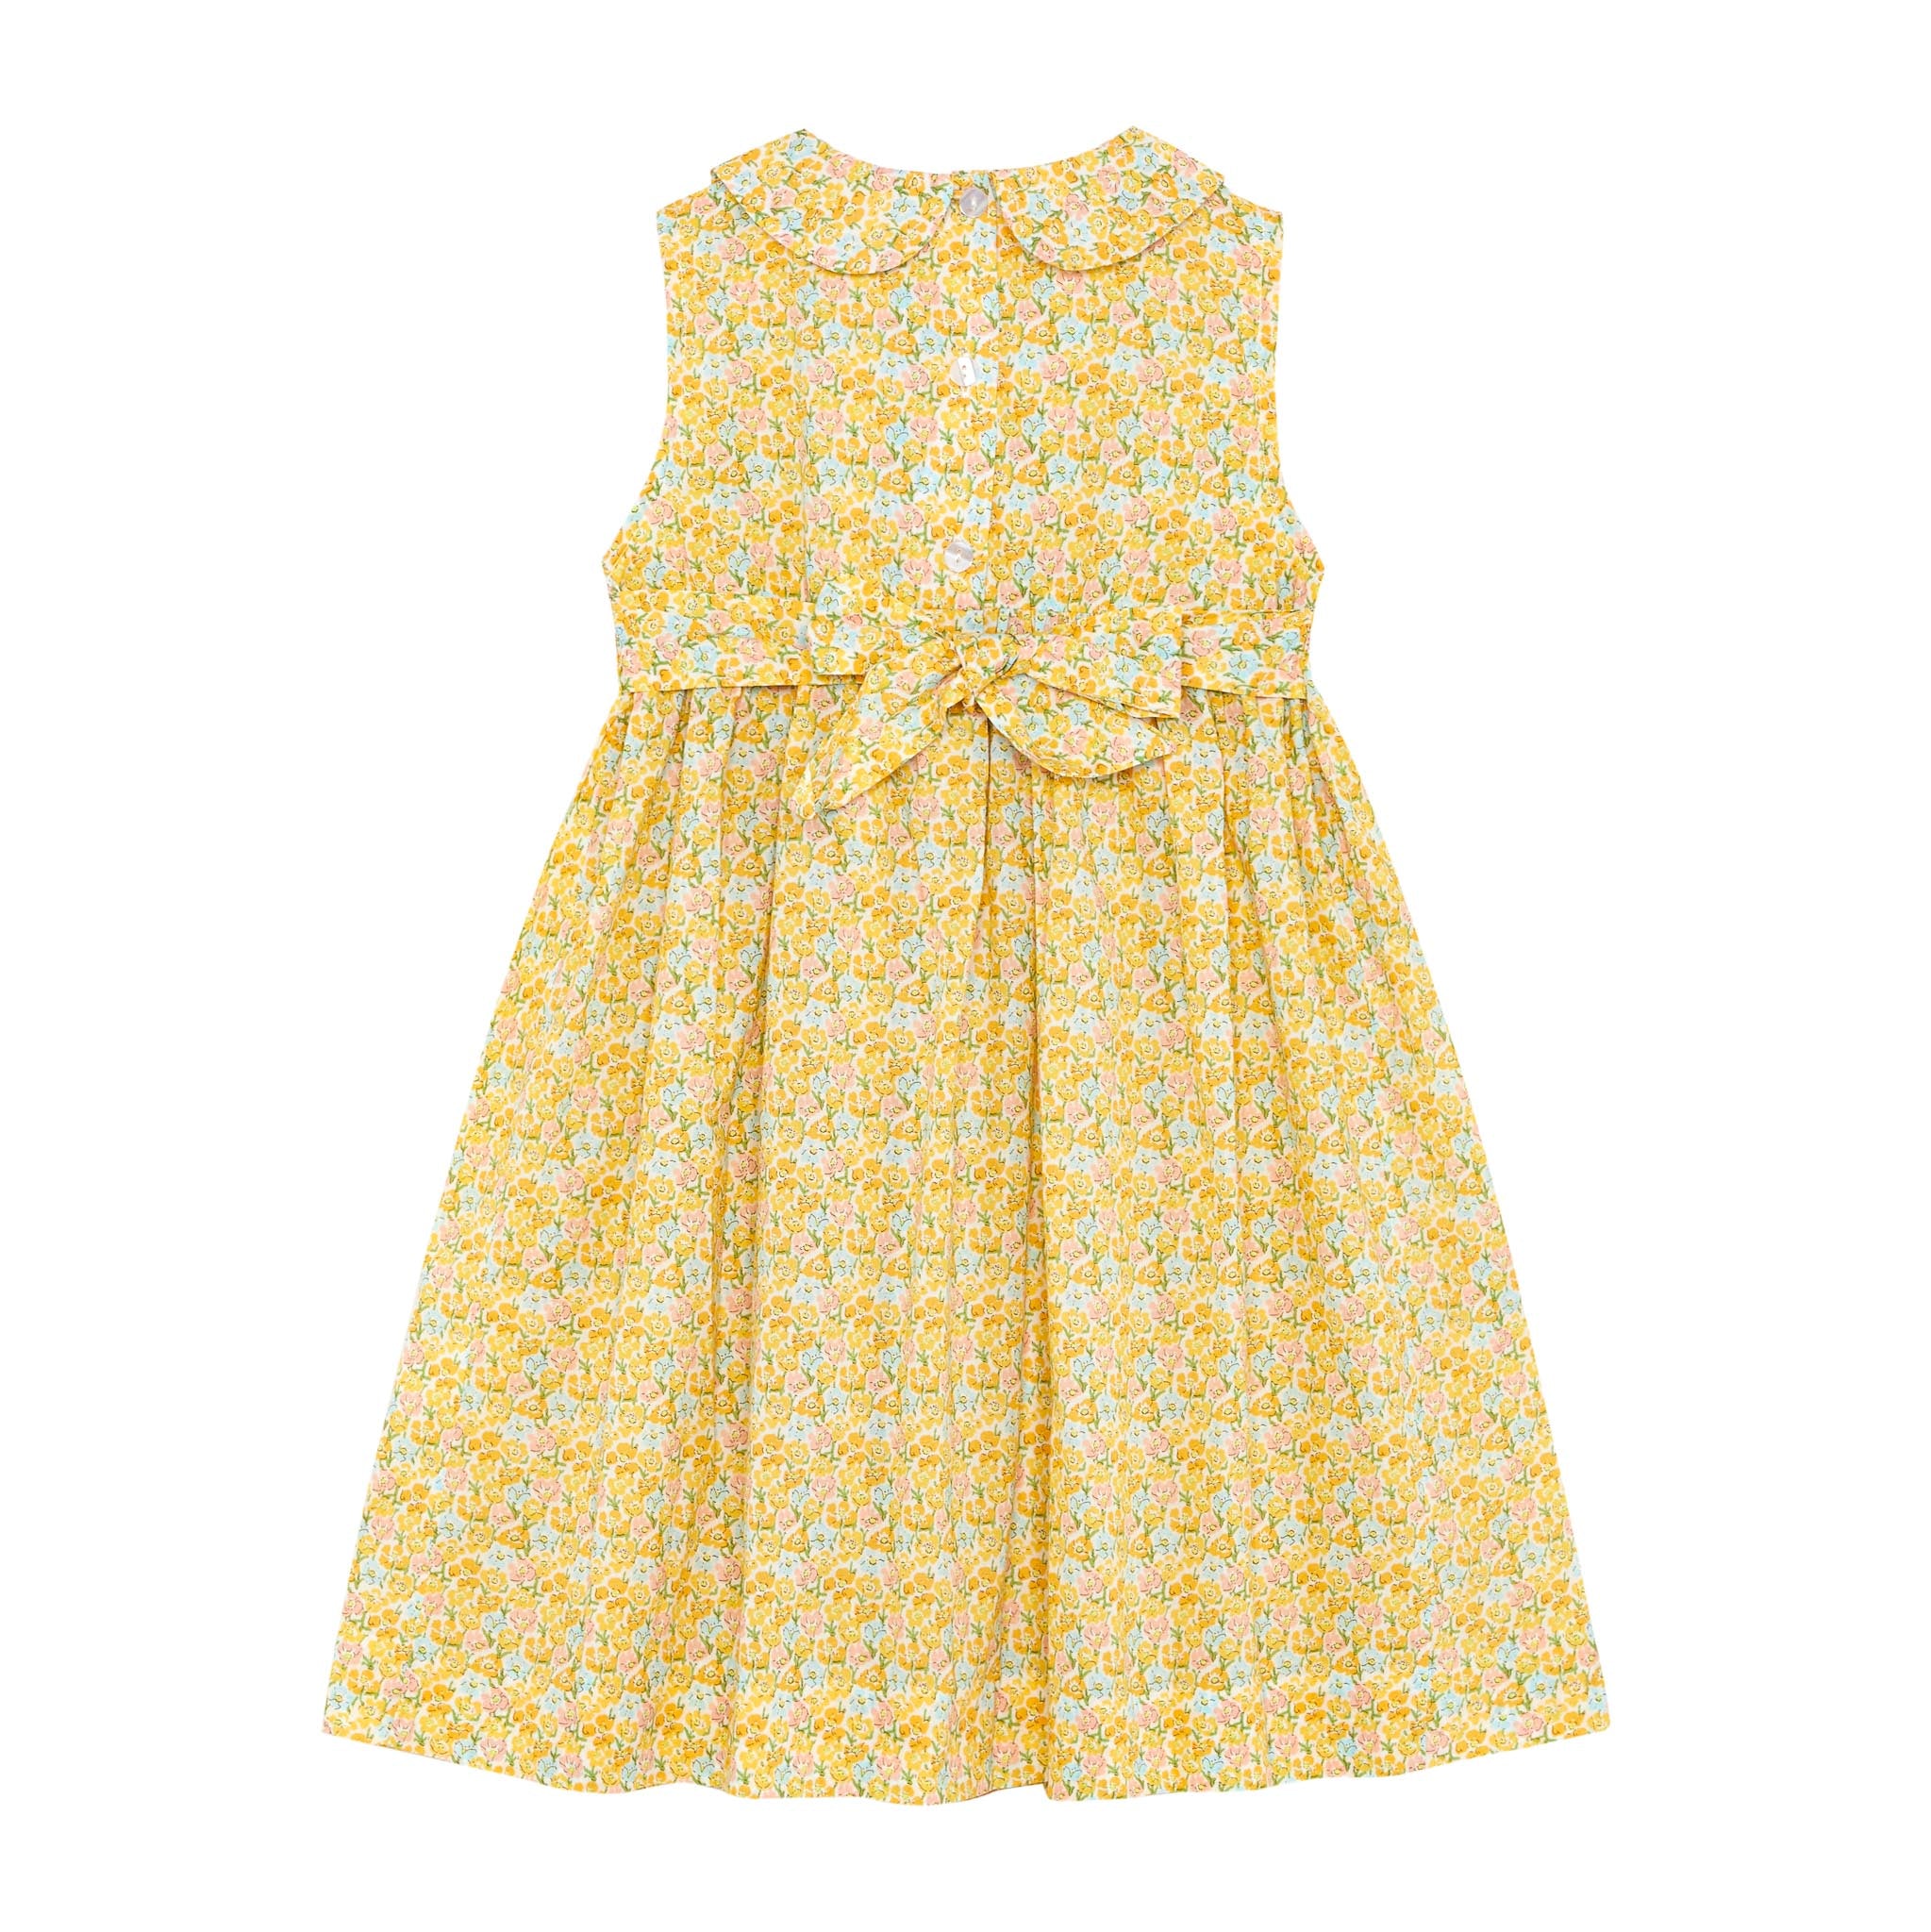 yellow floral smock dress, back